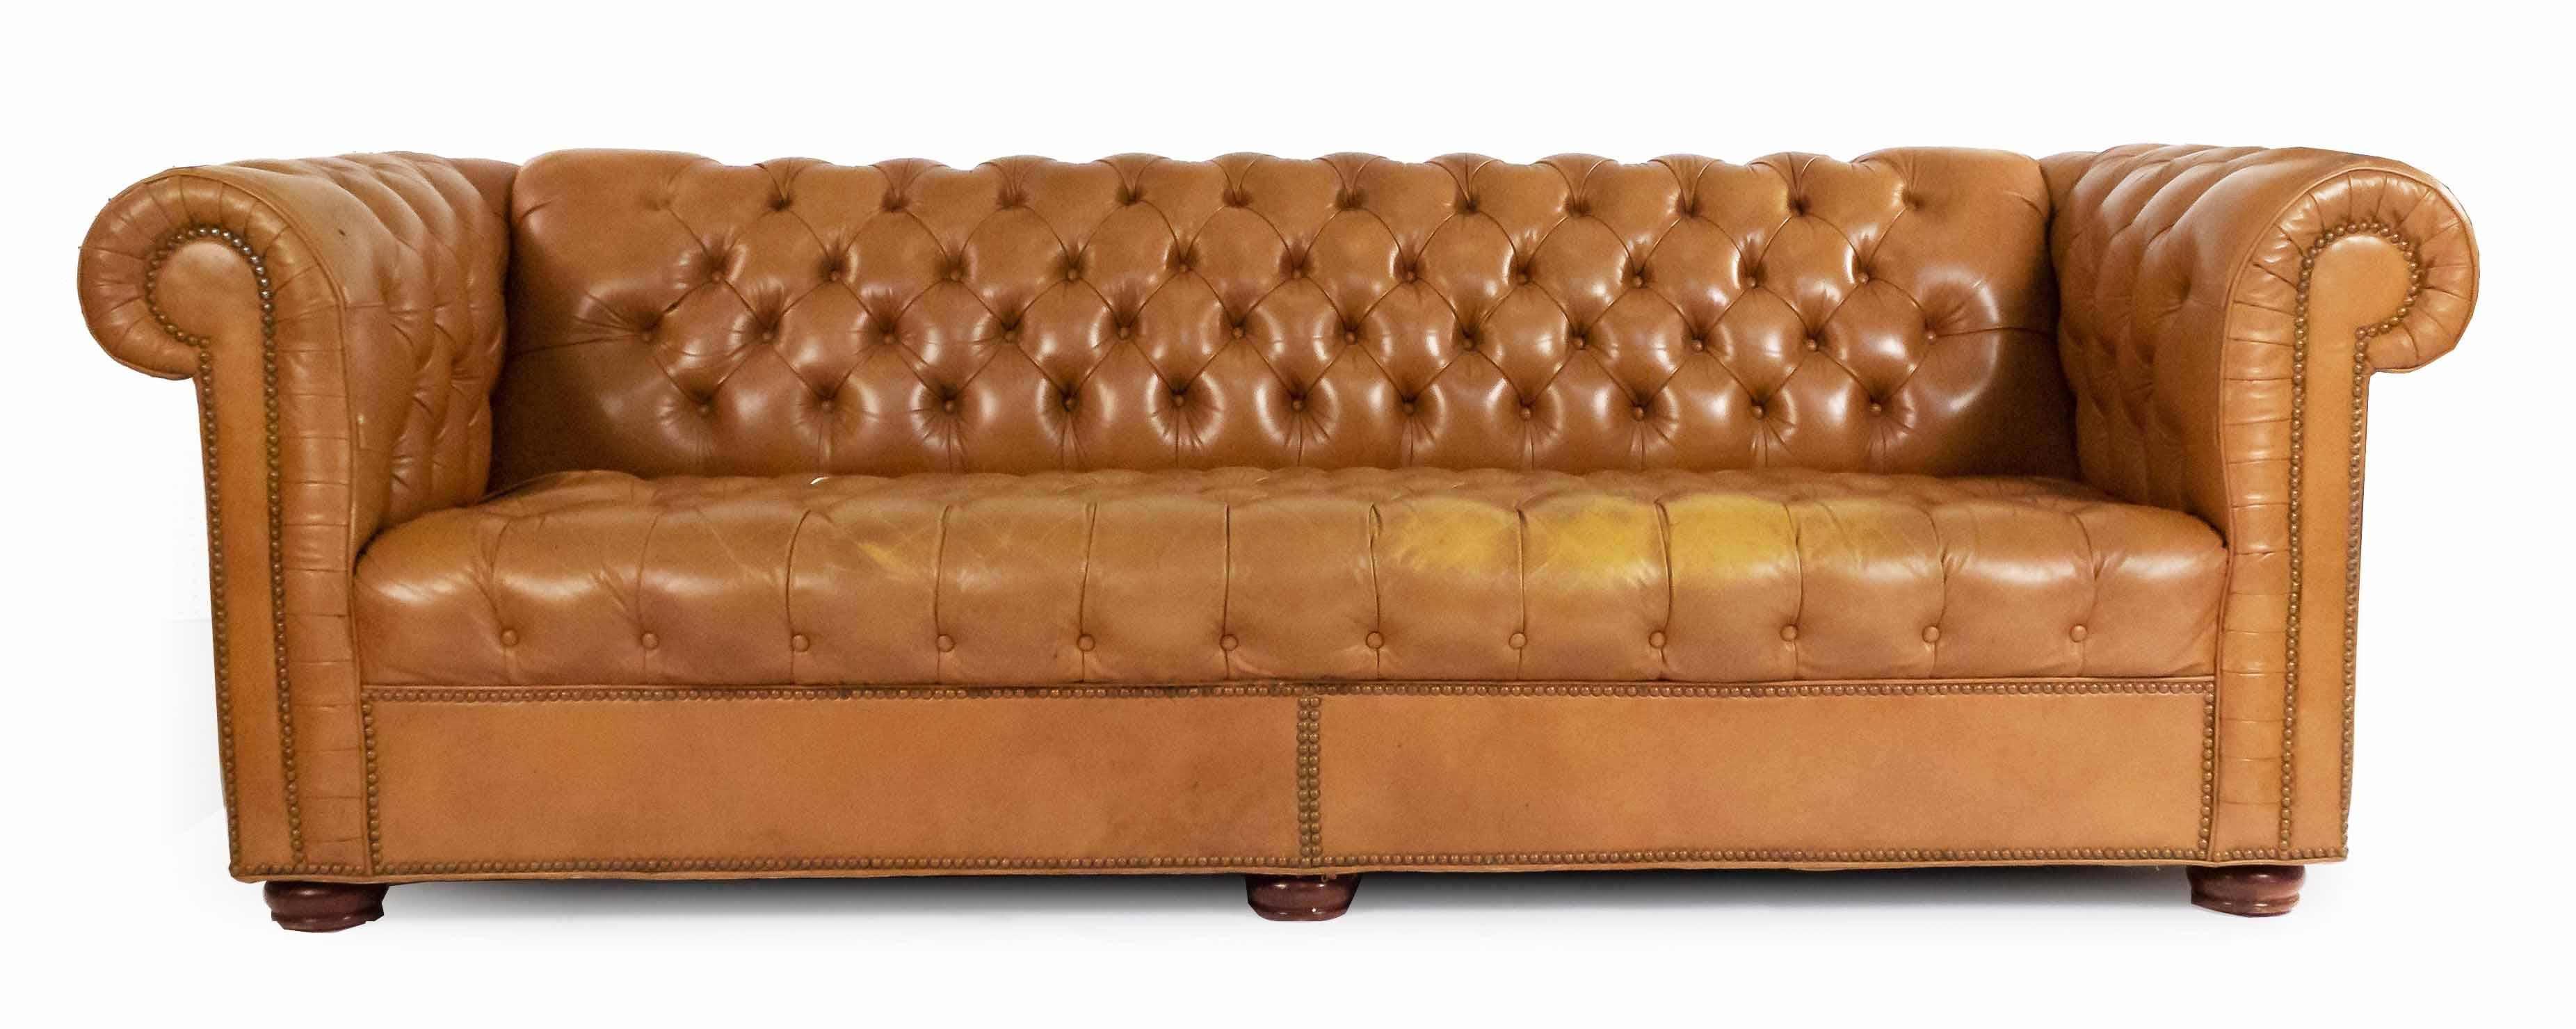 English Victorian style tobacco brown tufted leather chesterfield sofa with out-scrolled arms on four wooden brown feet. Brass rivets along trim.